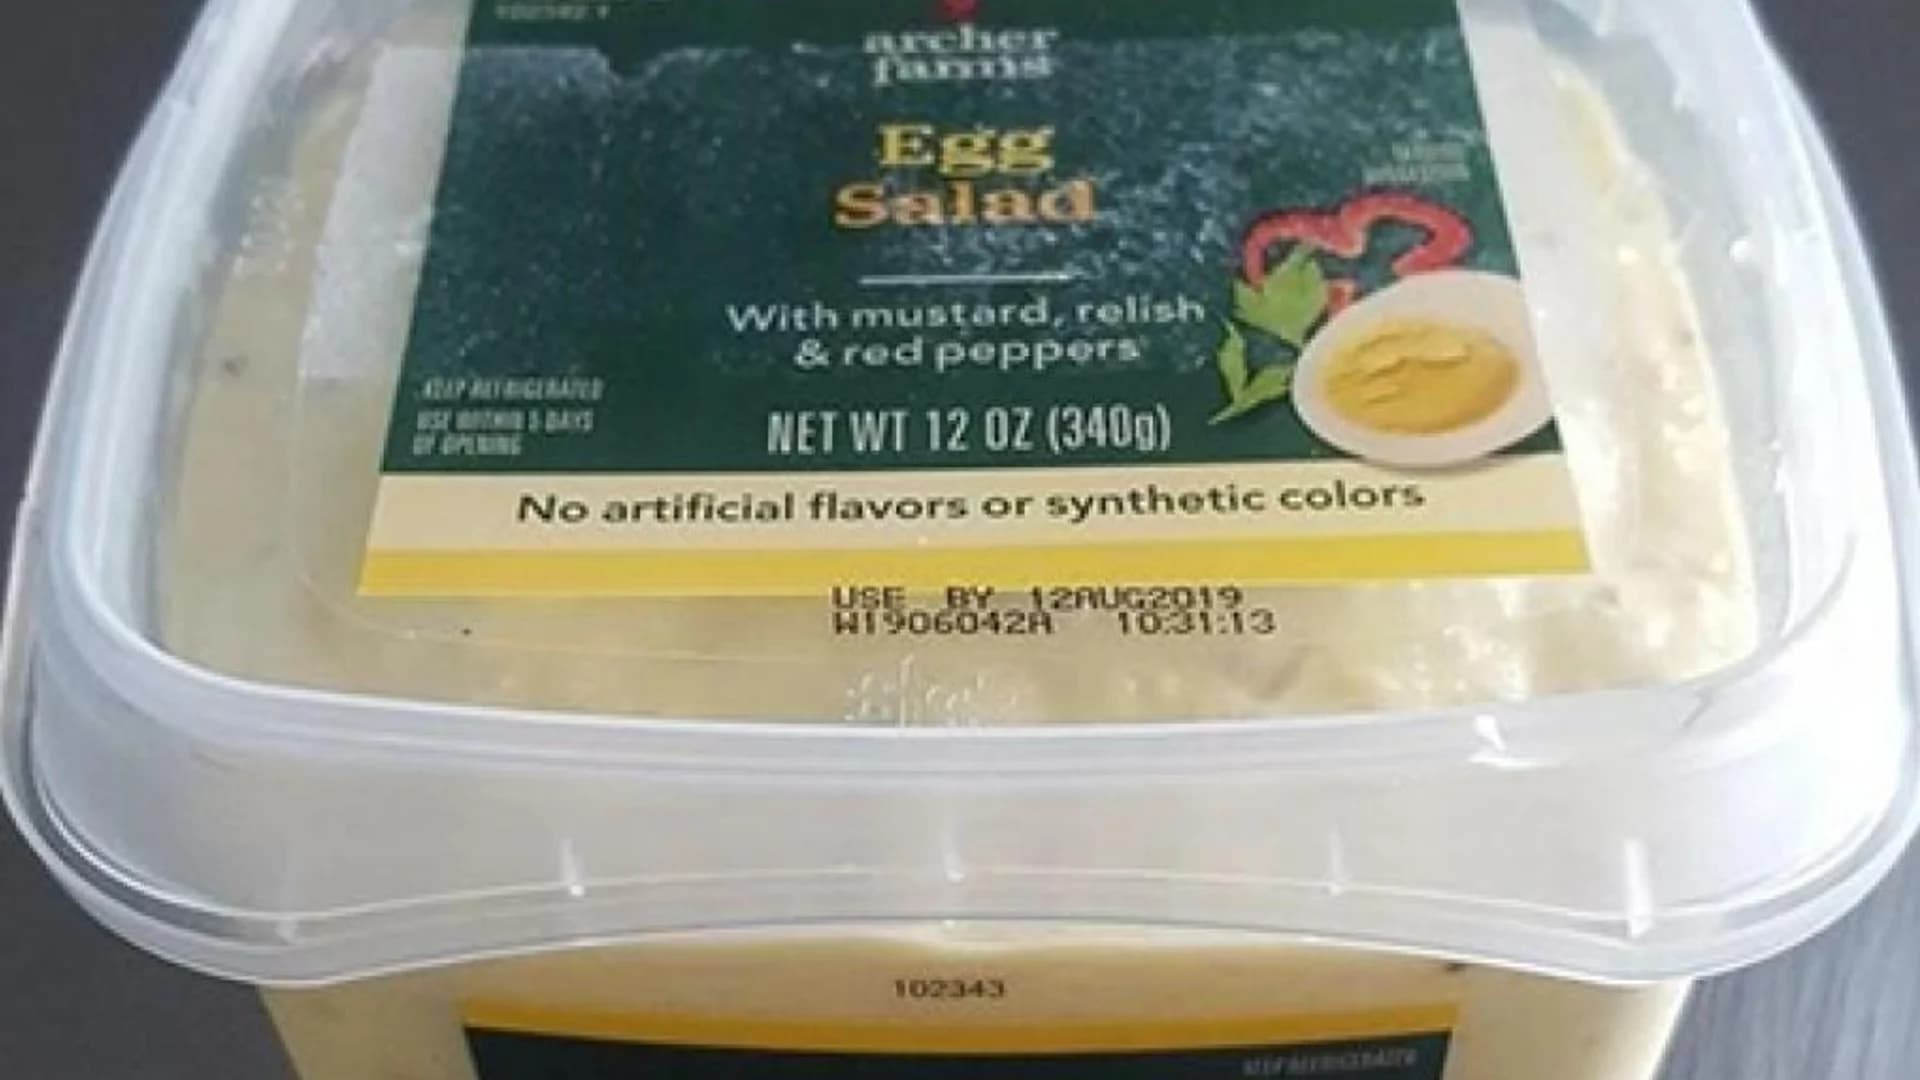 Target, Fresh Market egg salads and sandwiches recalled over listeria concerns